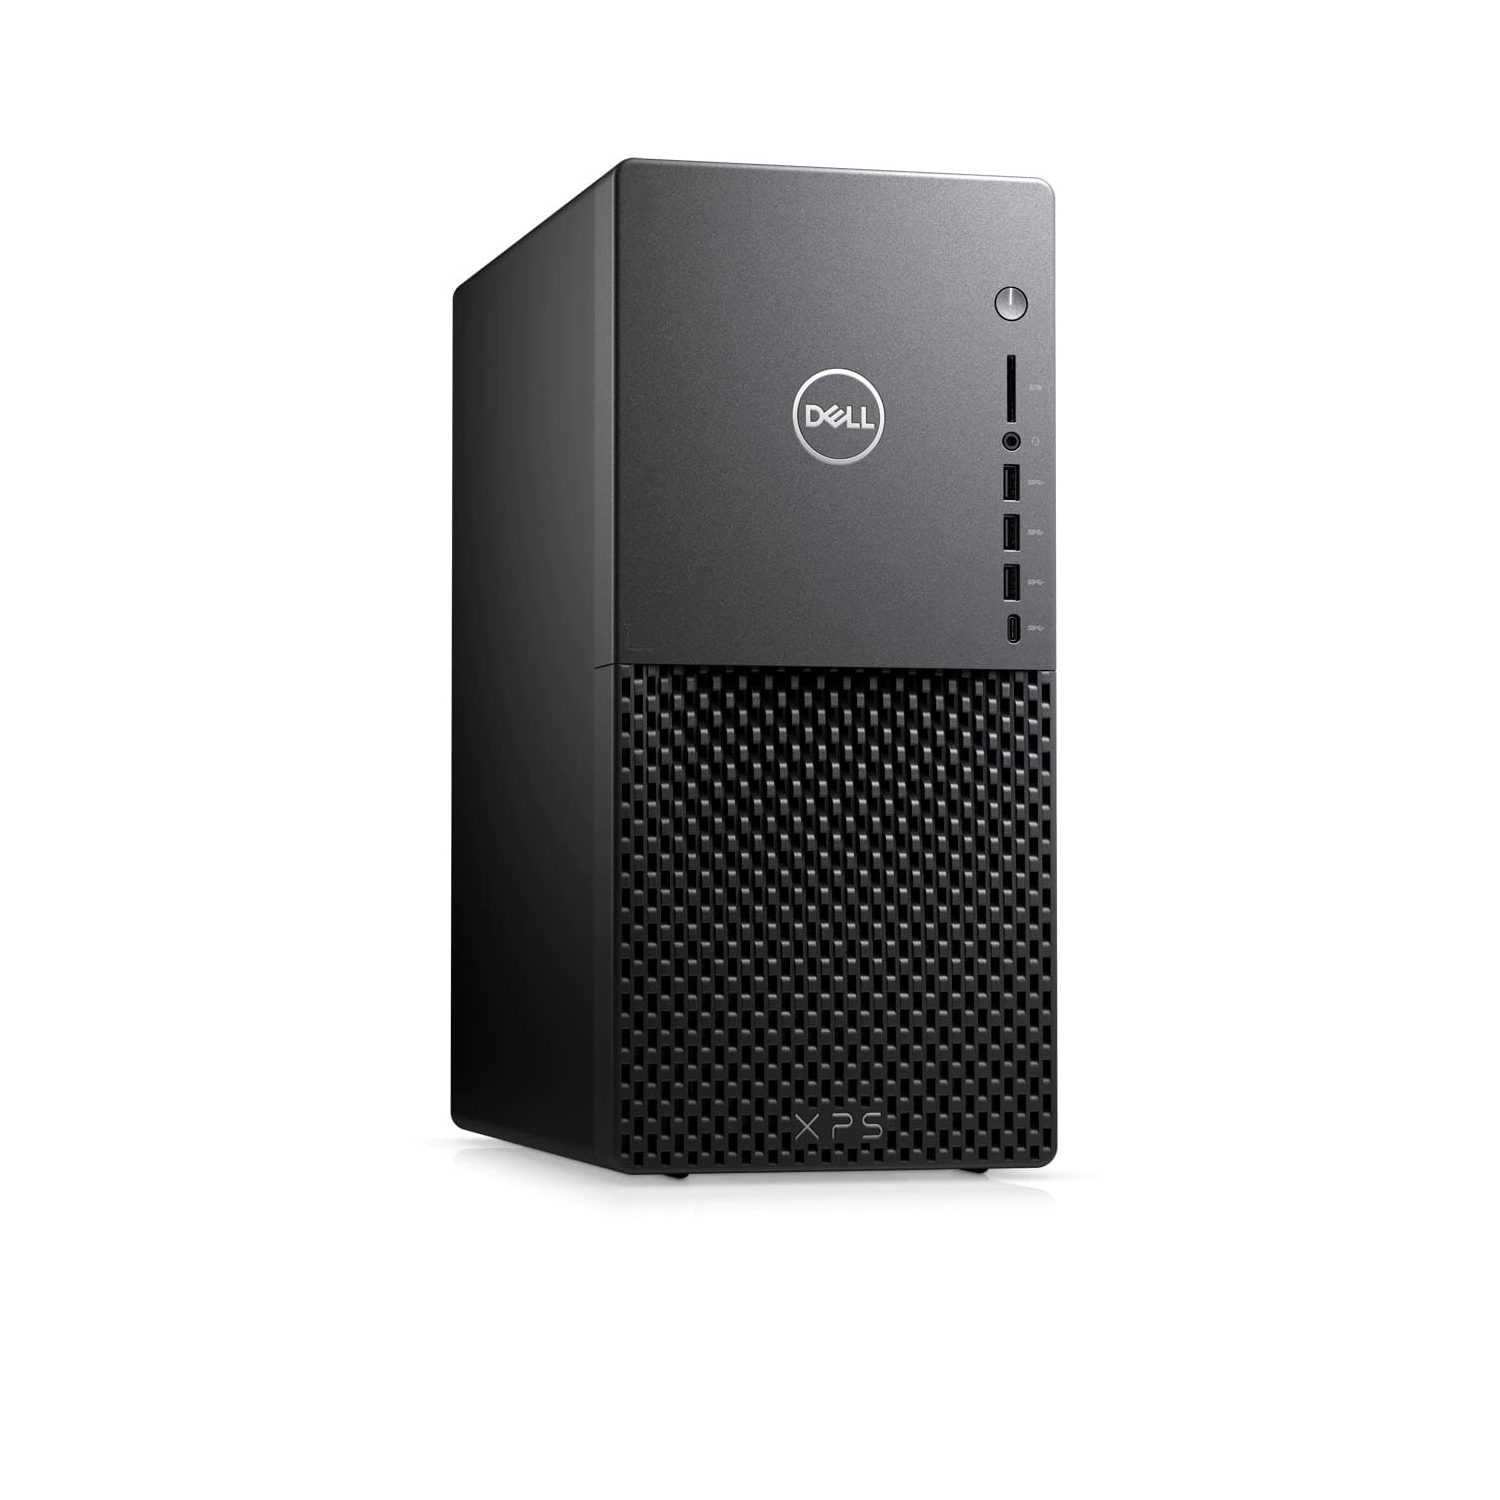 Refurbished (Excellent) - Dell XPS 8940 Desktop (2020) | Core i7 - 1TB SSD + 1TB HDD - 32GB RAM - RX 5700 | 8 Cores @ 4.9 GHz - 11th Gen CPU Certified Refurbished